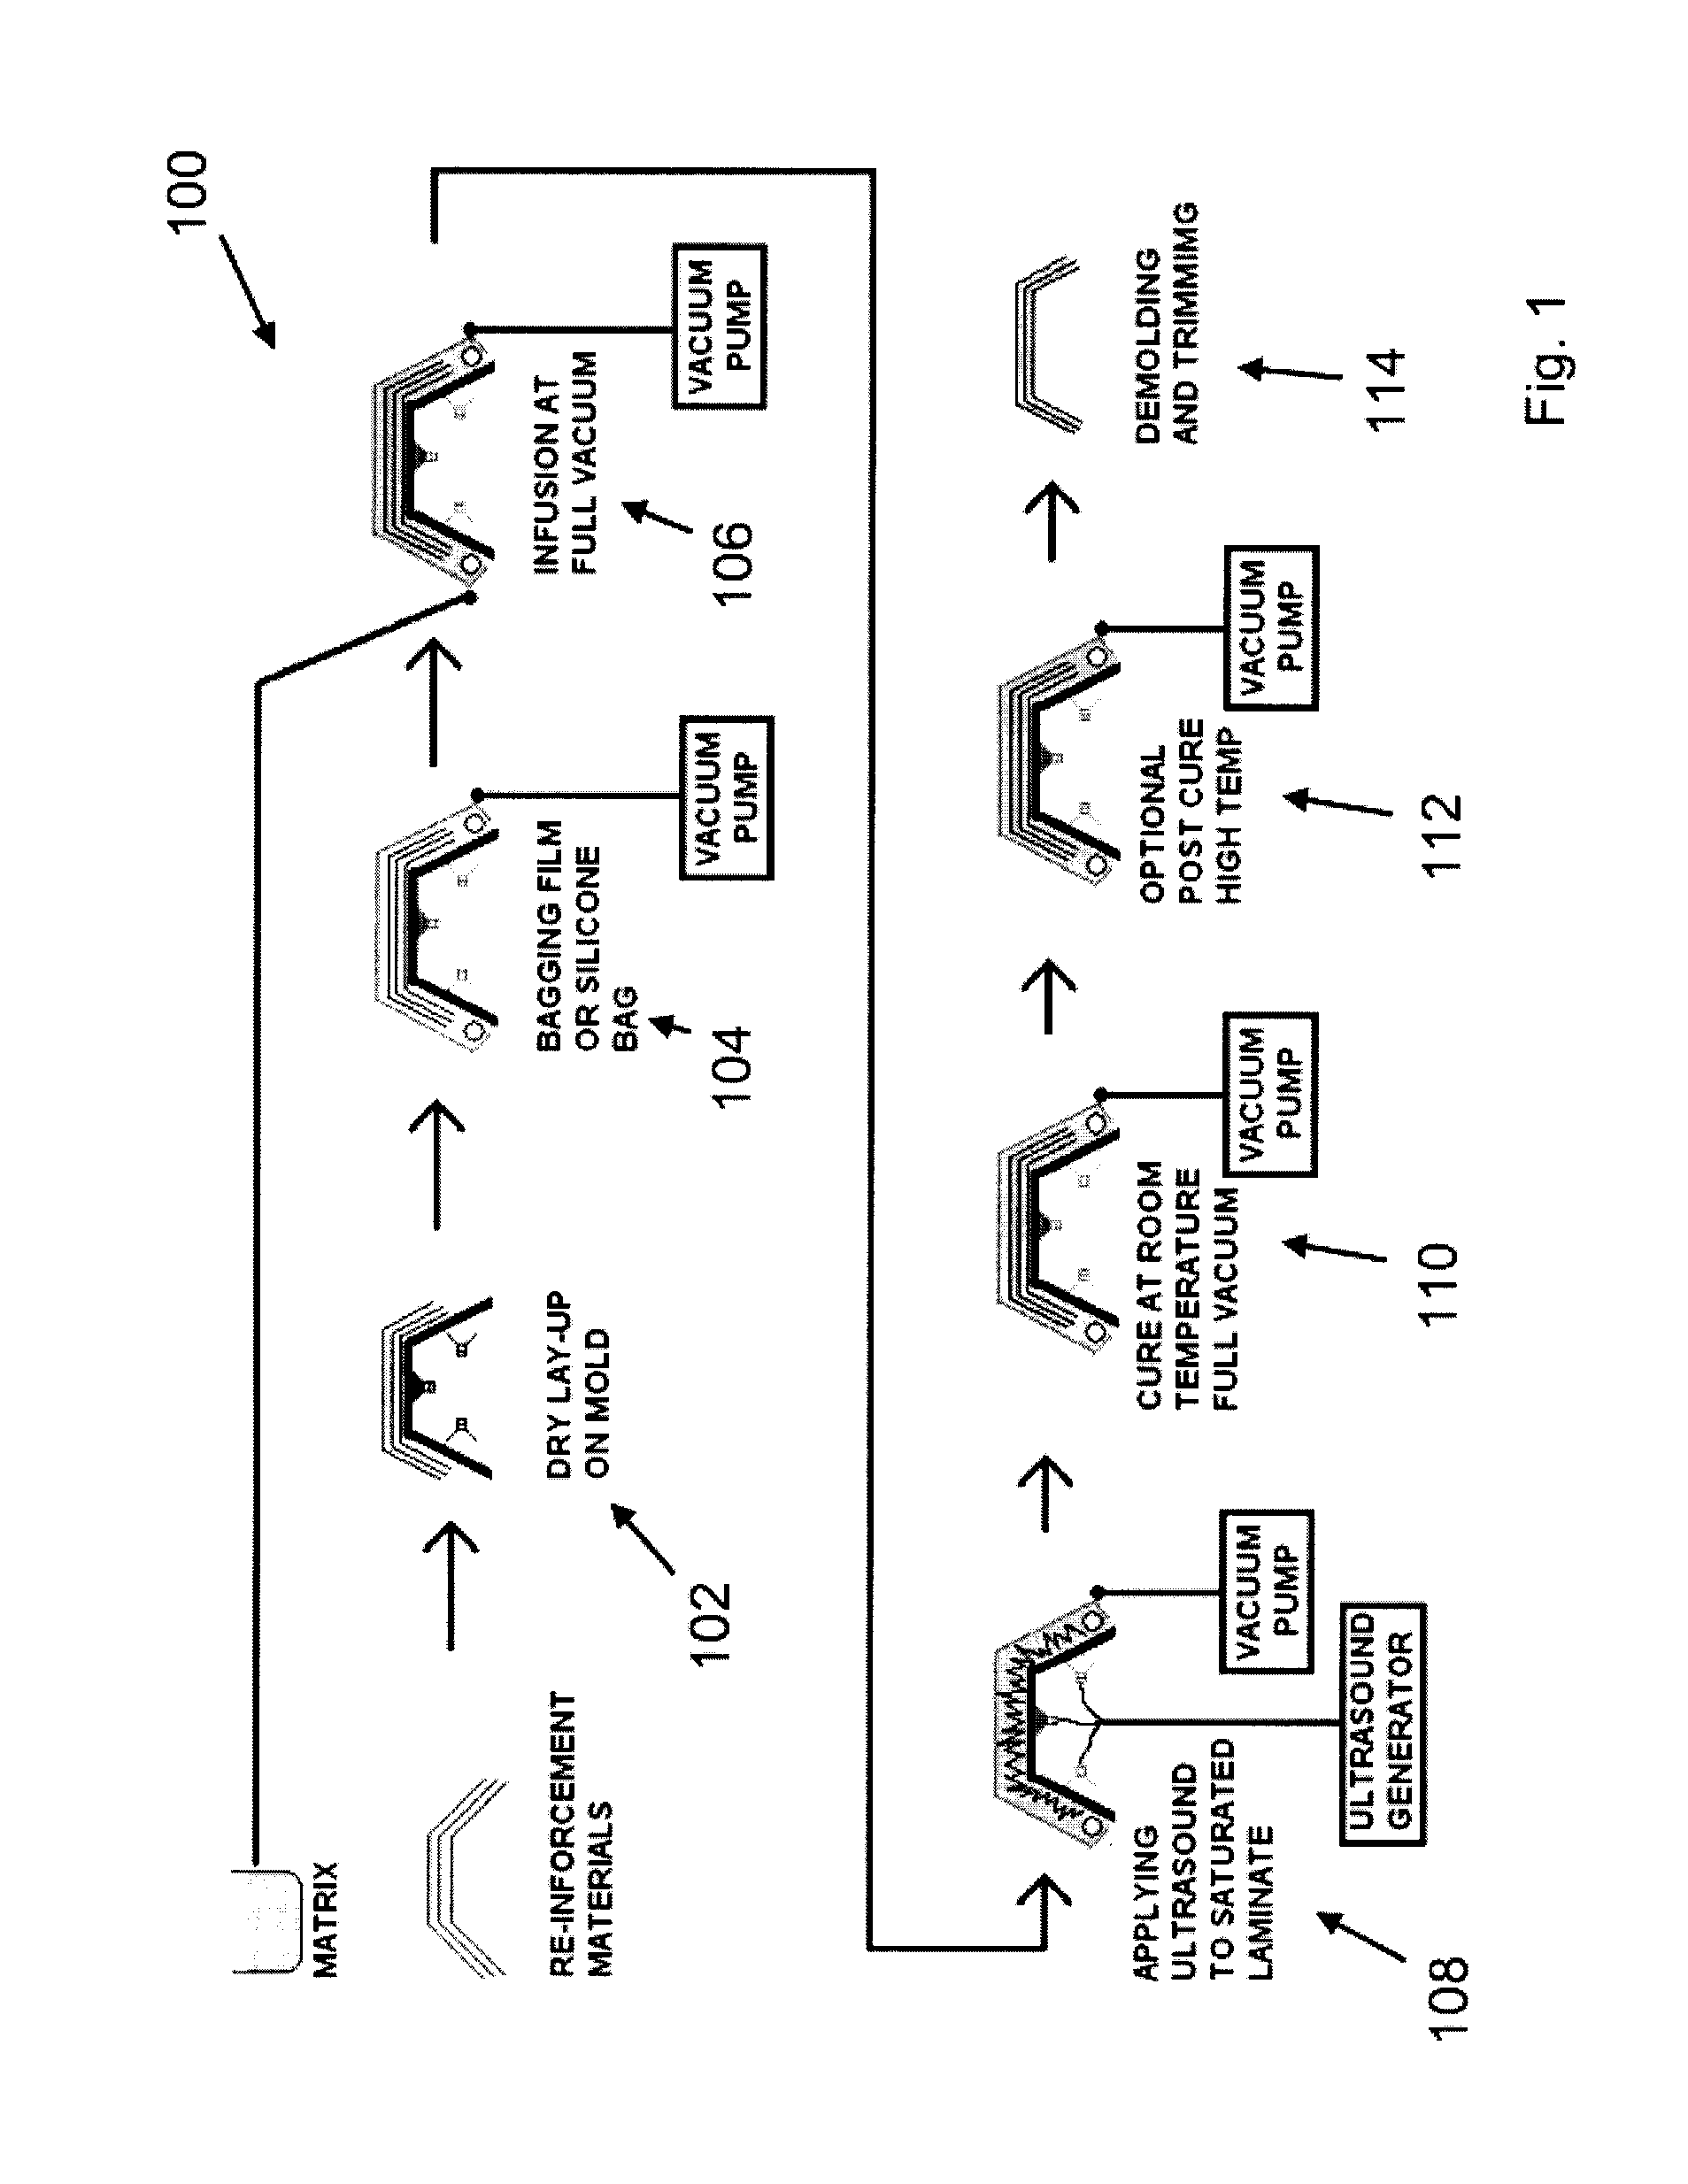 Process and Apparatus for Molding Composite Articles